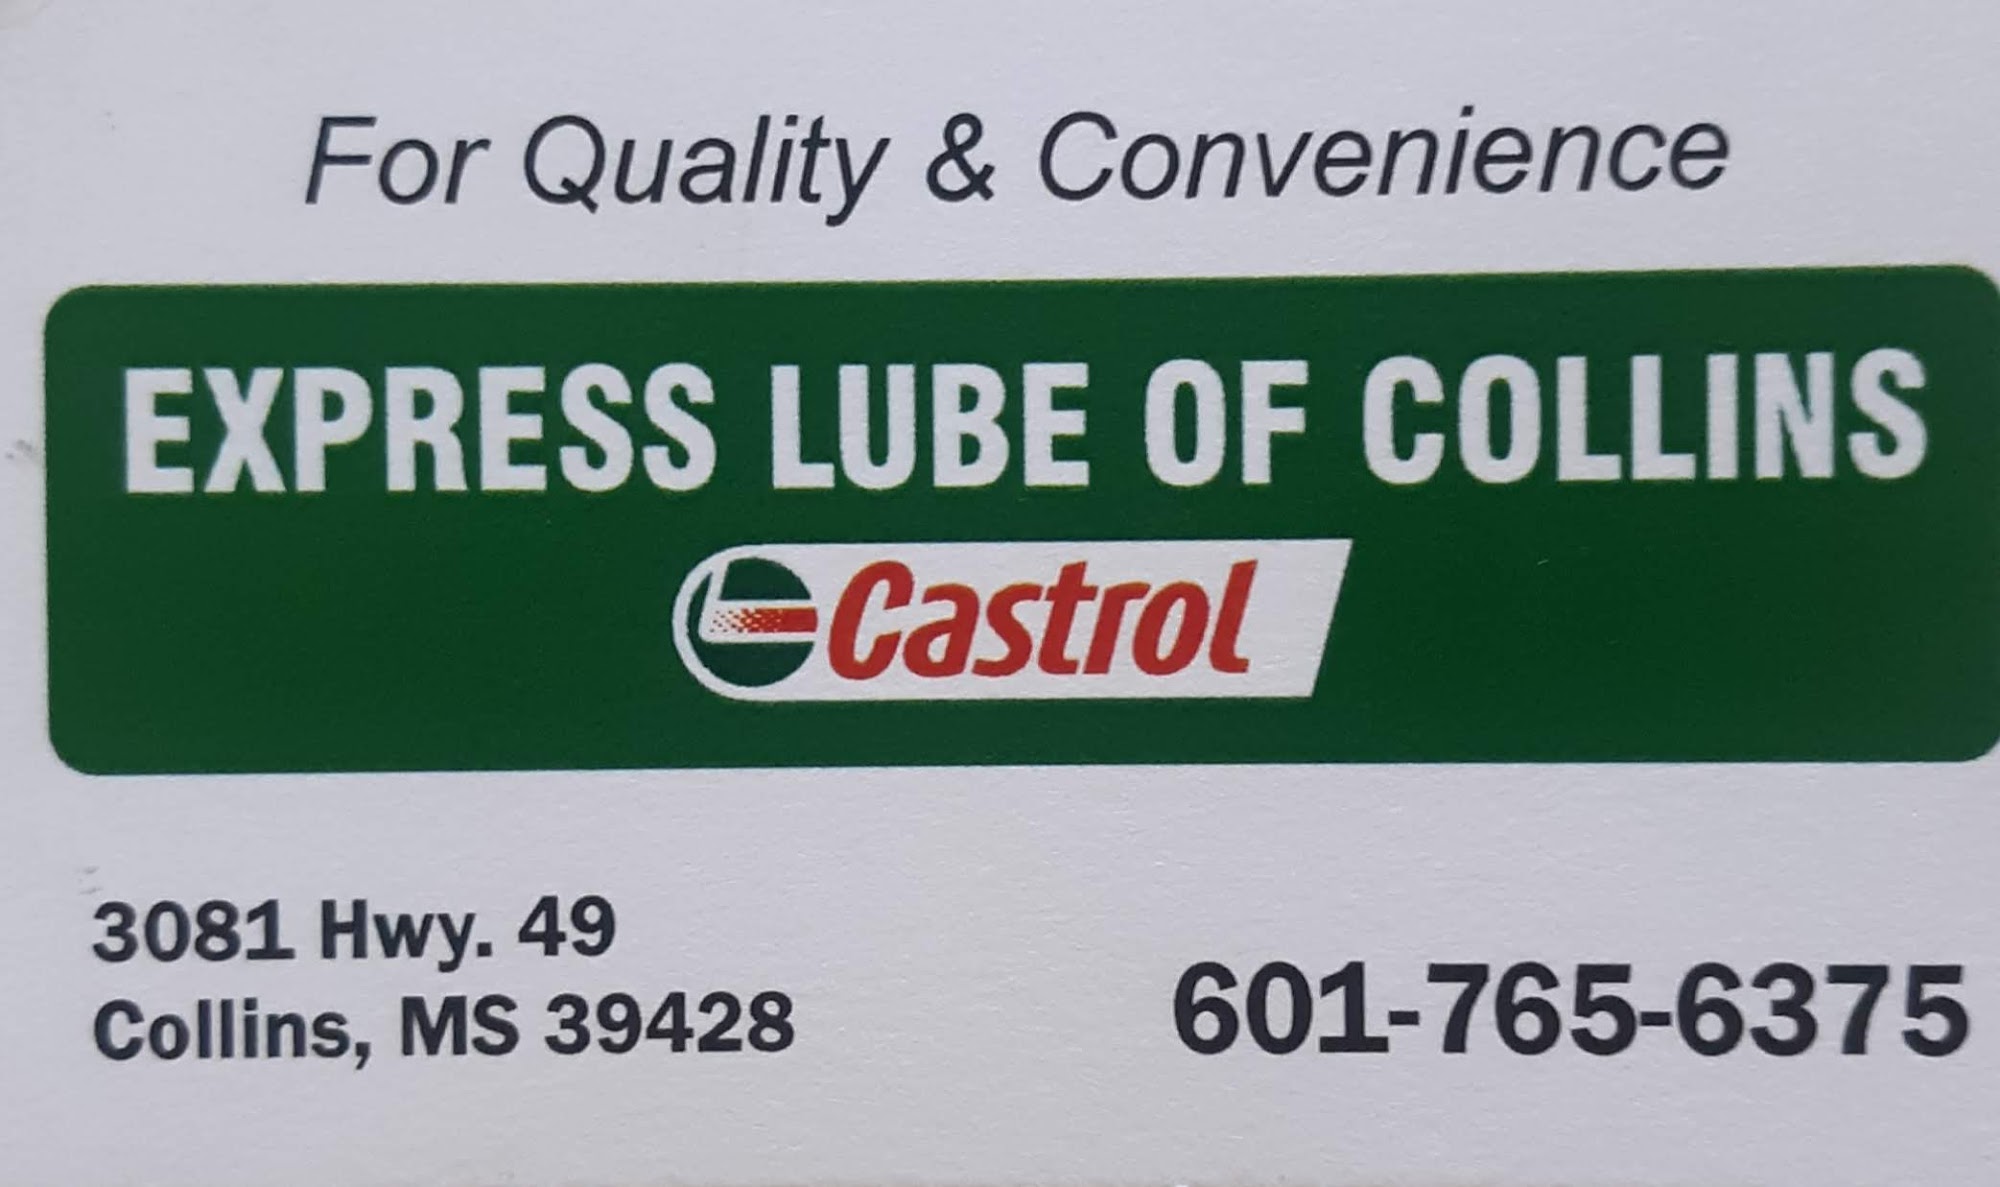 Express Lube of Collins